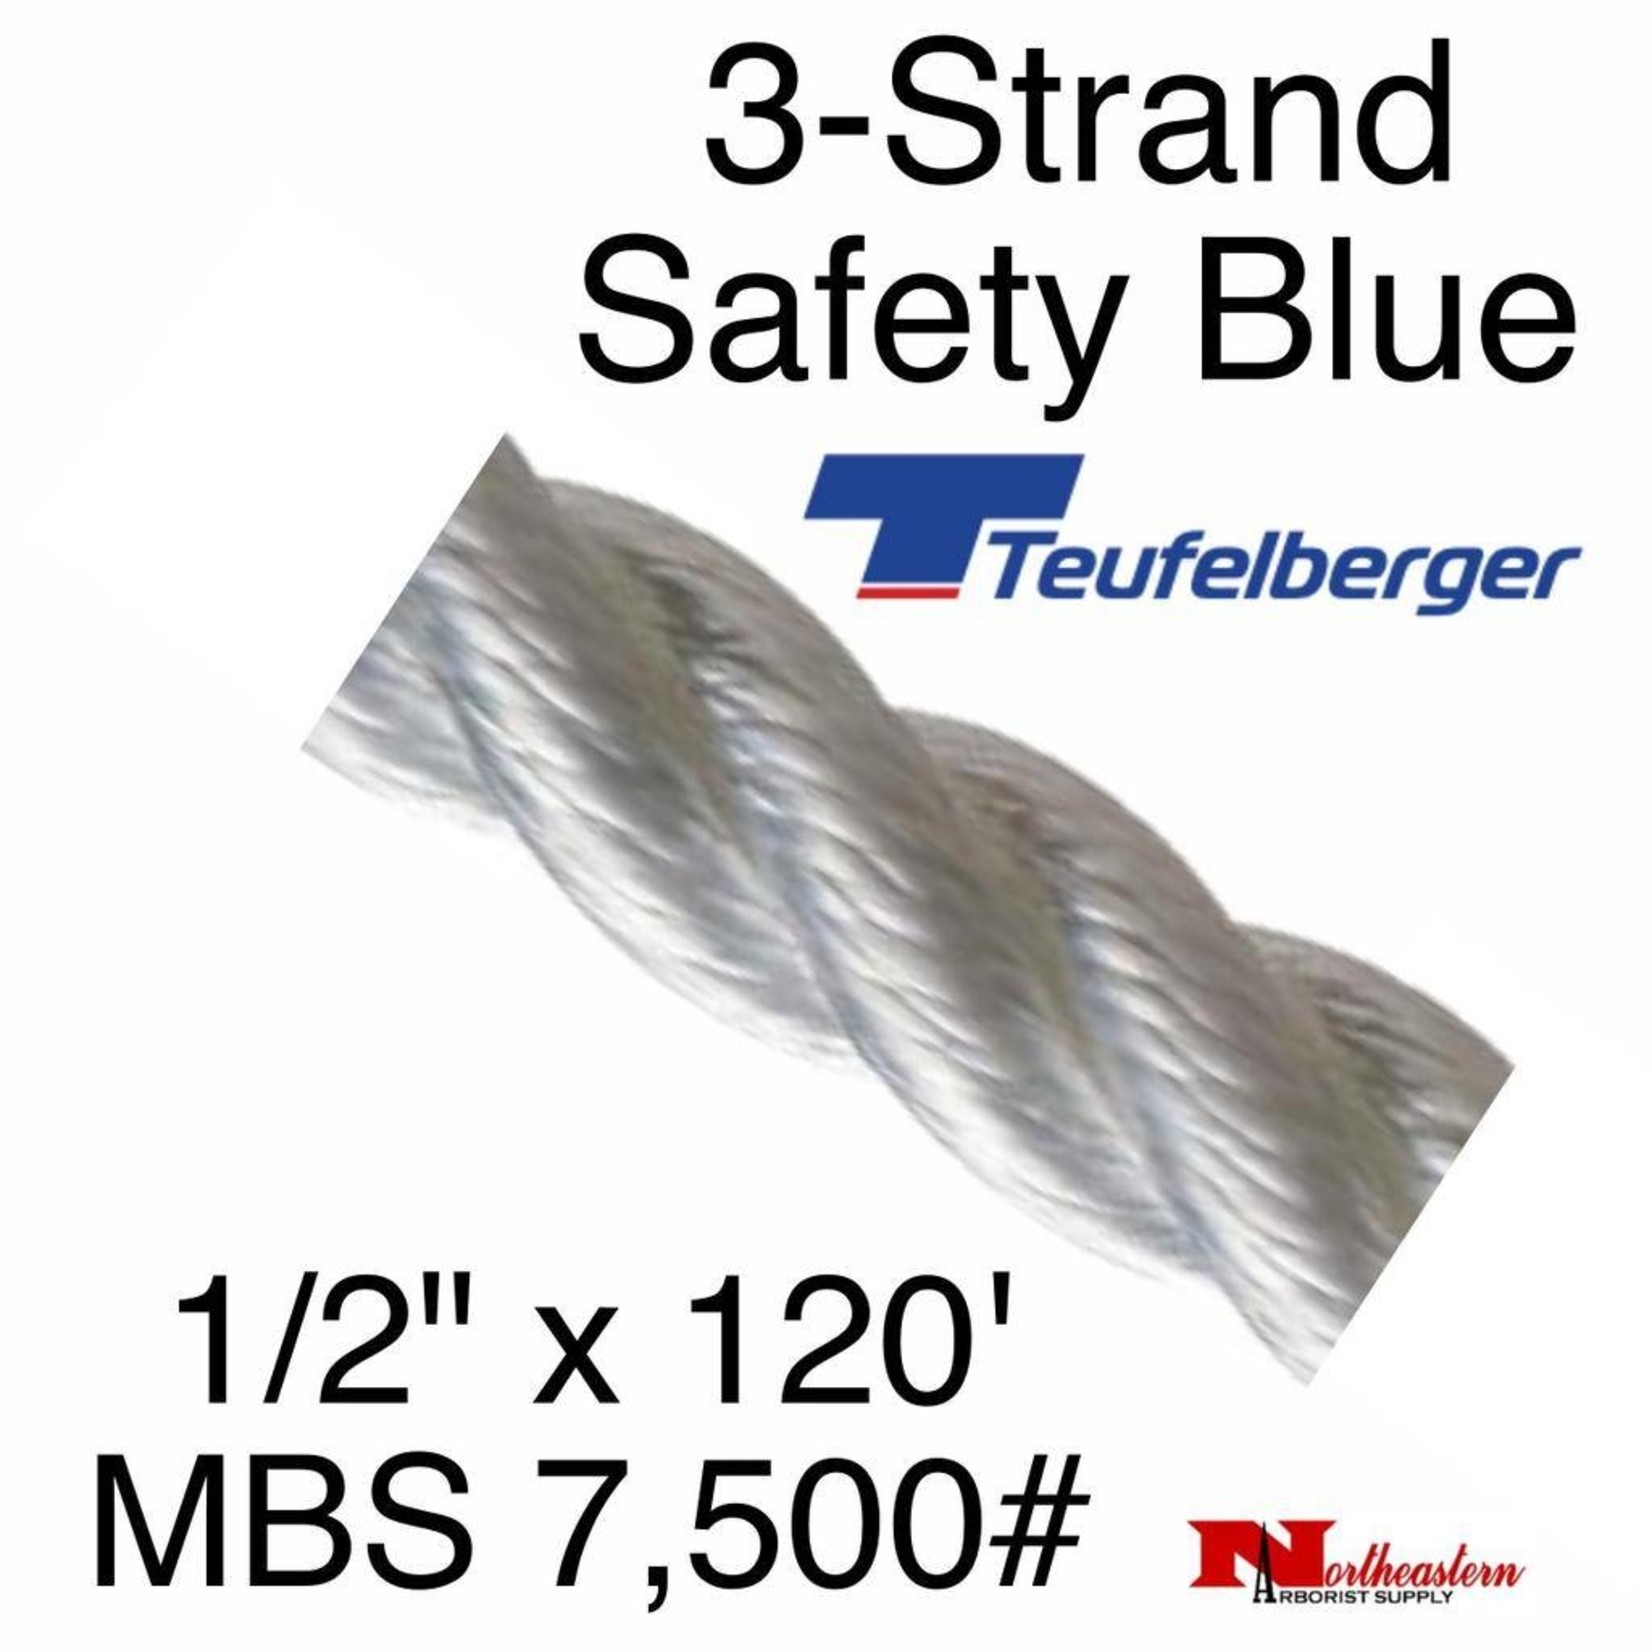 Teufelberger Safety Blue 3-Strand 1/2in X 120ft By New Engalnd Ropes #6,500